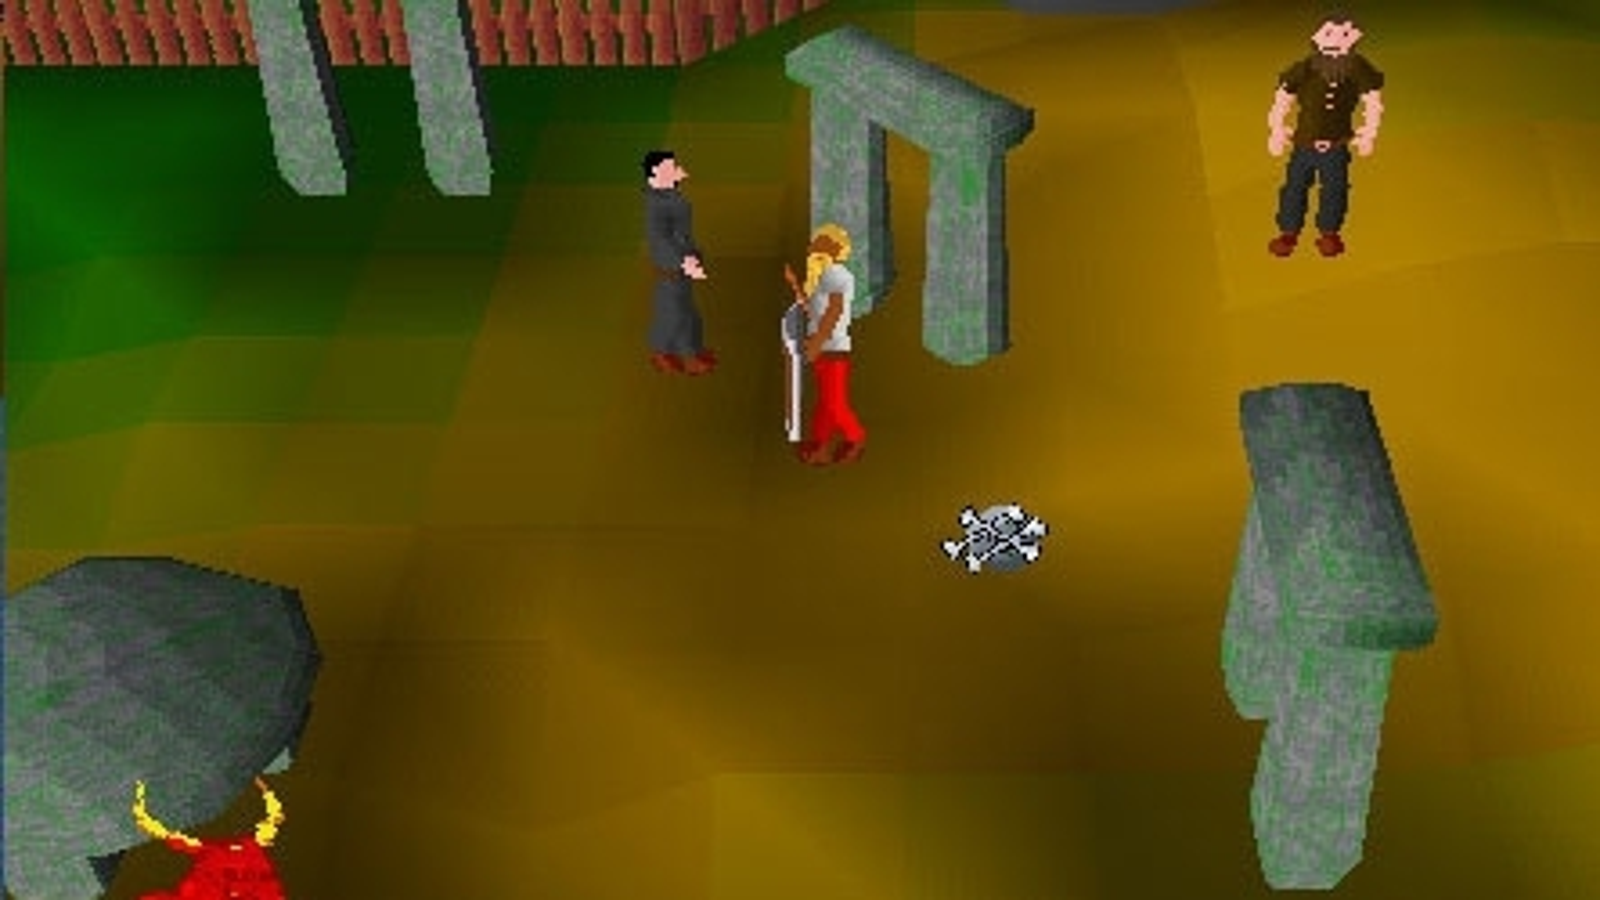 RuneScape's new Necromancy skill reinvents combat once again, 22 years on